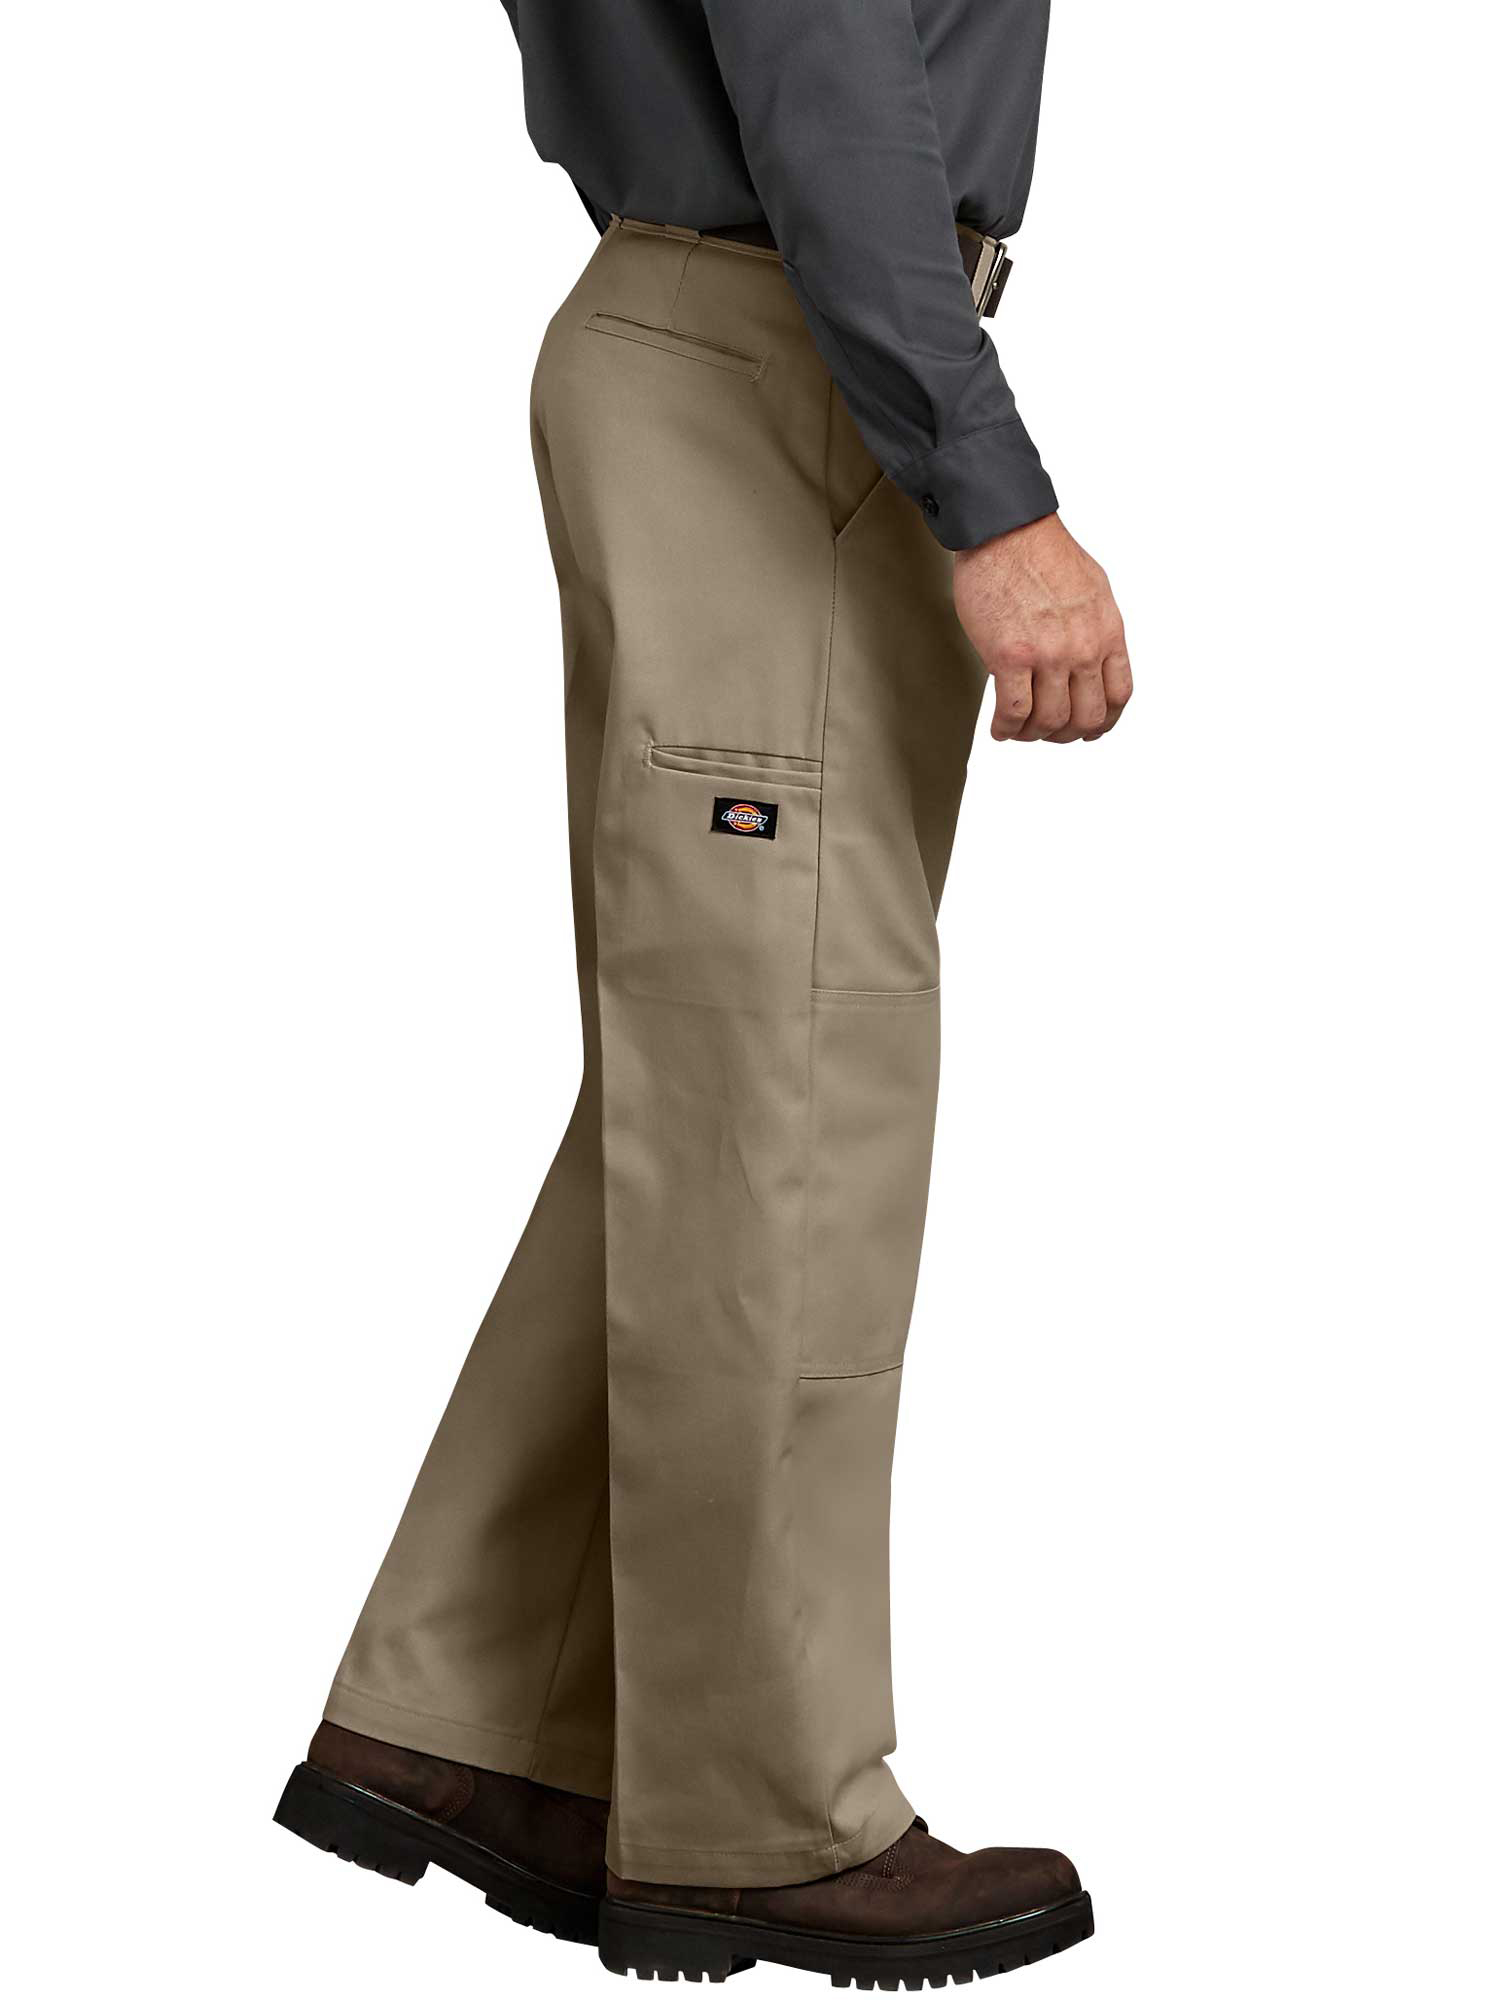 Dickies Mens Relaxed Fit Straight Leg Double Knee Pants - image 3 of 3